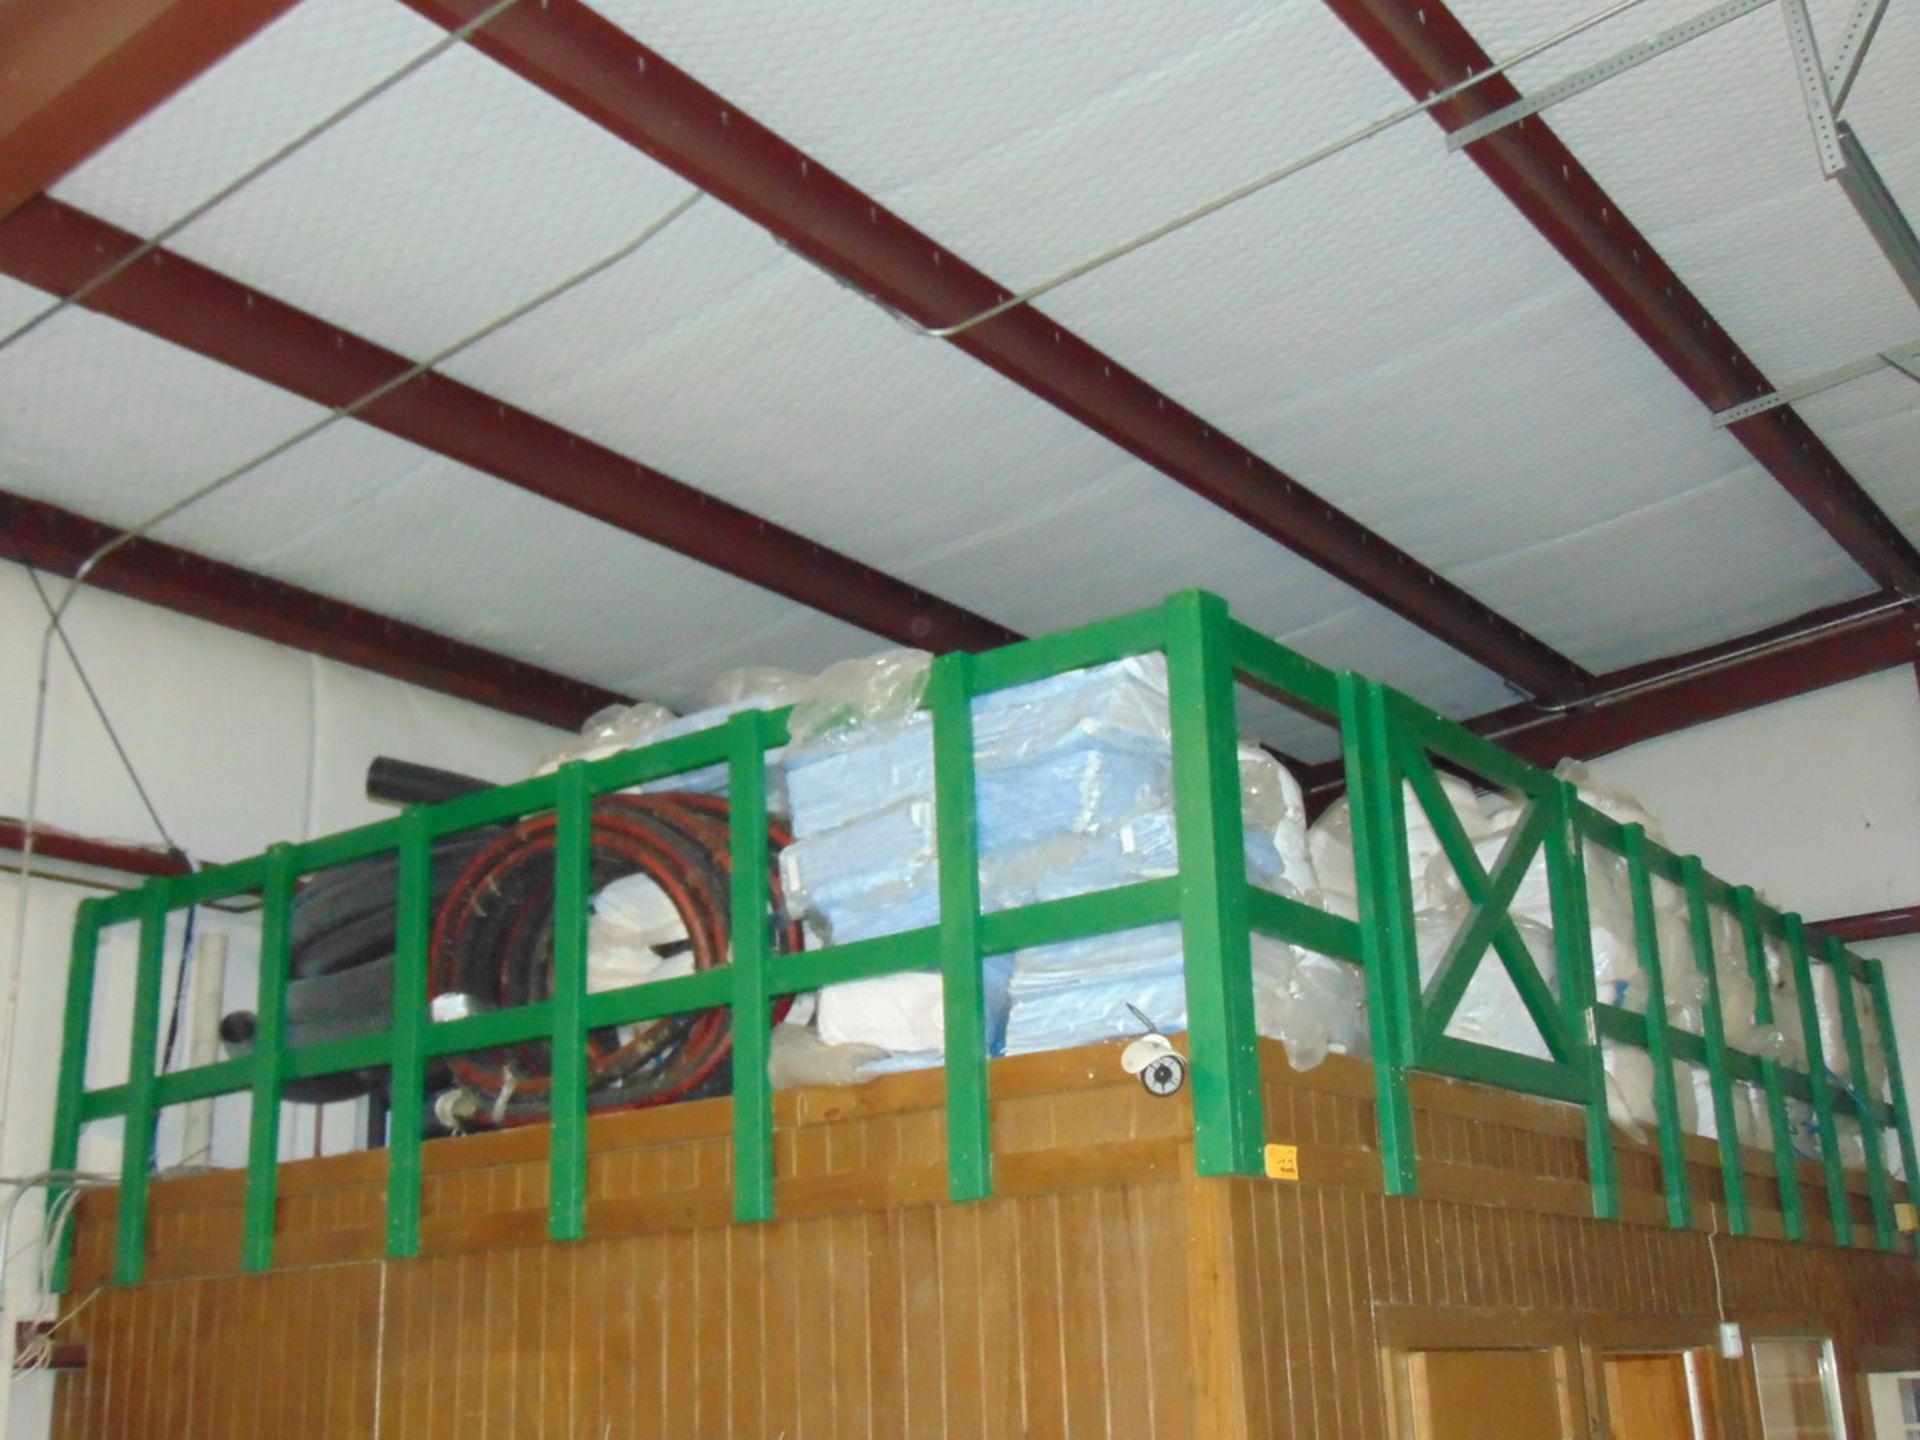 Mezzanine Lot Of Hazardous Oil Spill Material To Include But Not Limited To: Absorbent Swipes, Pads,